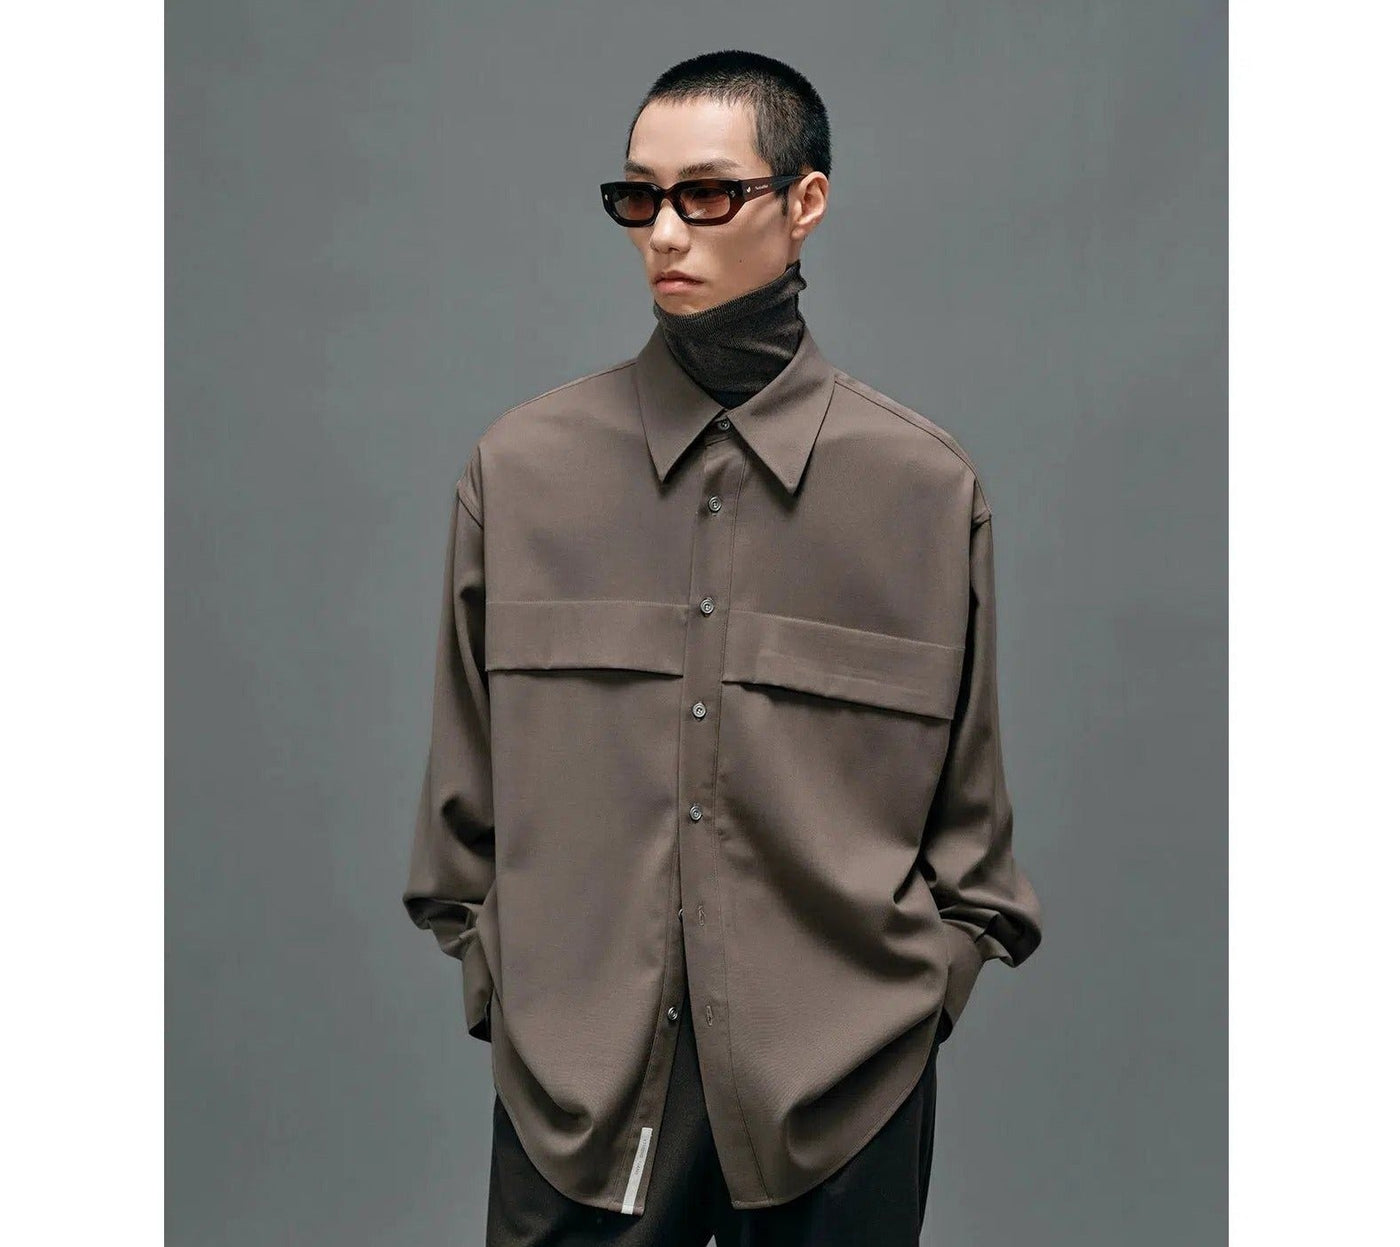 Relaxed Fit Buttoned Shirt Korean Street Fashion Shirt By NANS Shop Online at OH Vault